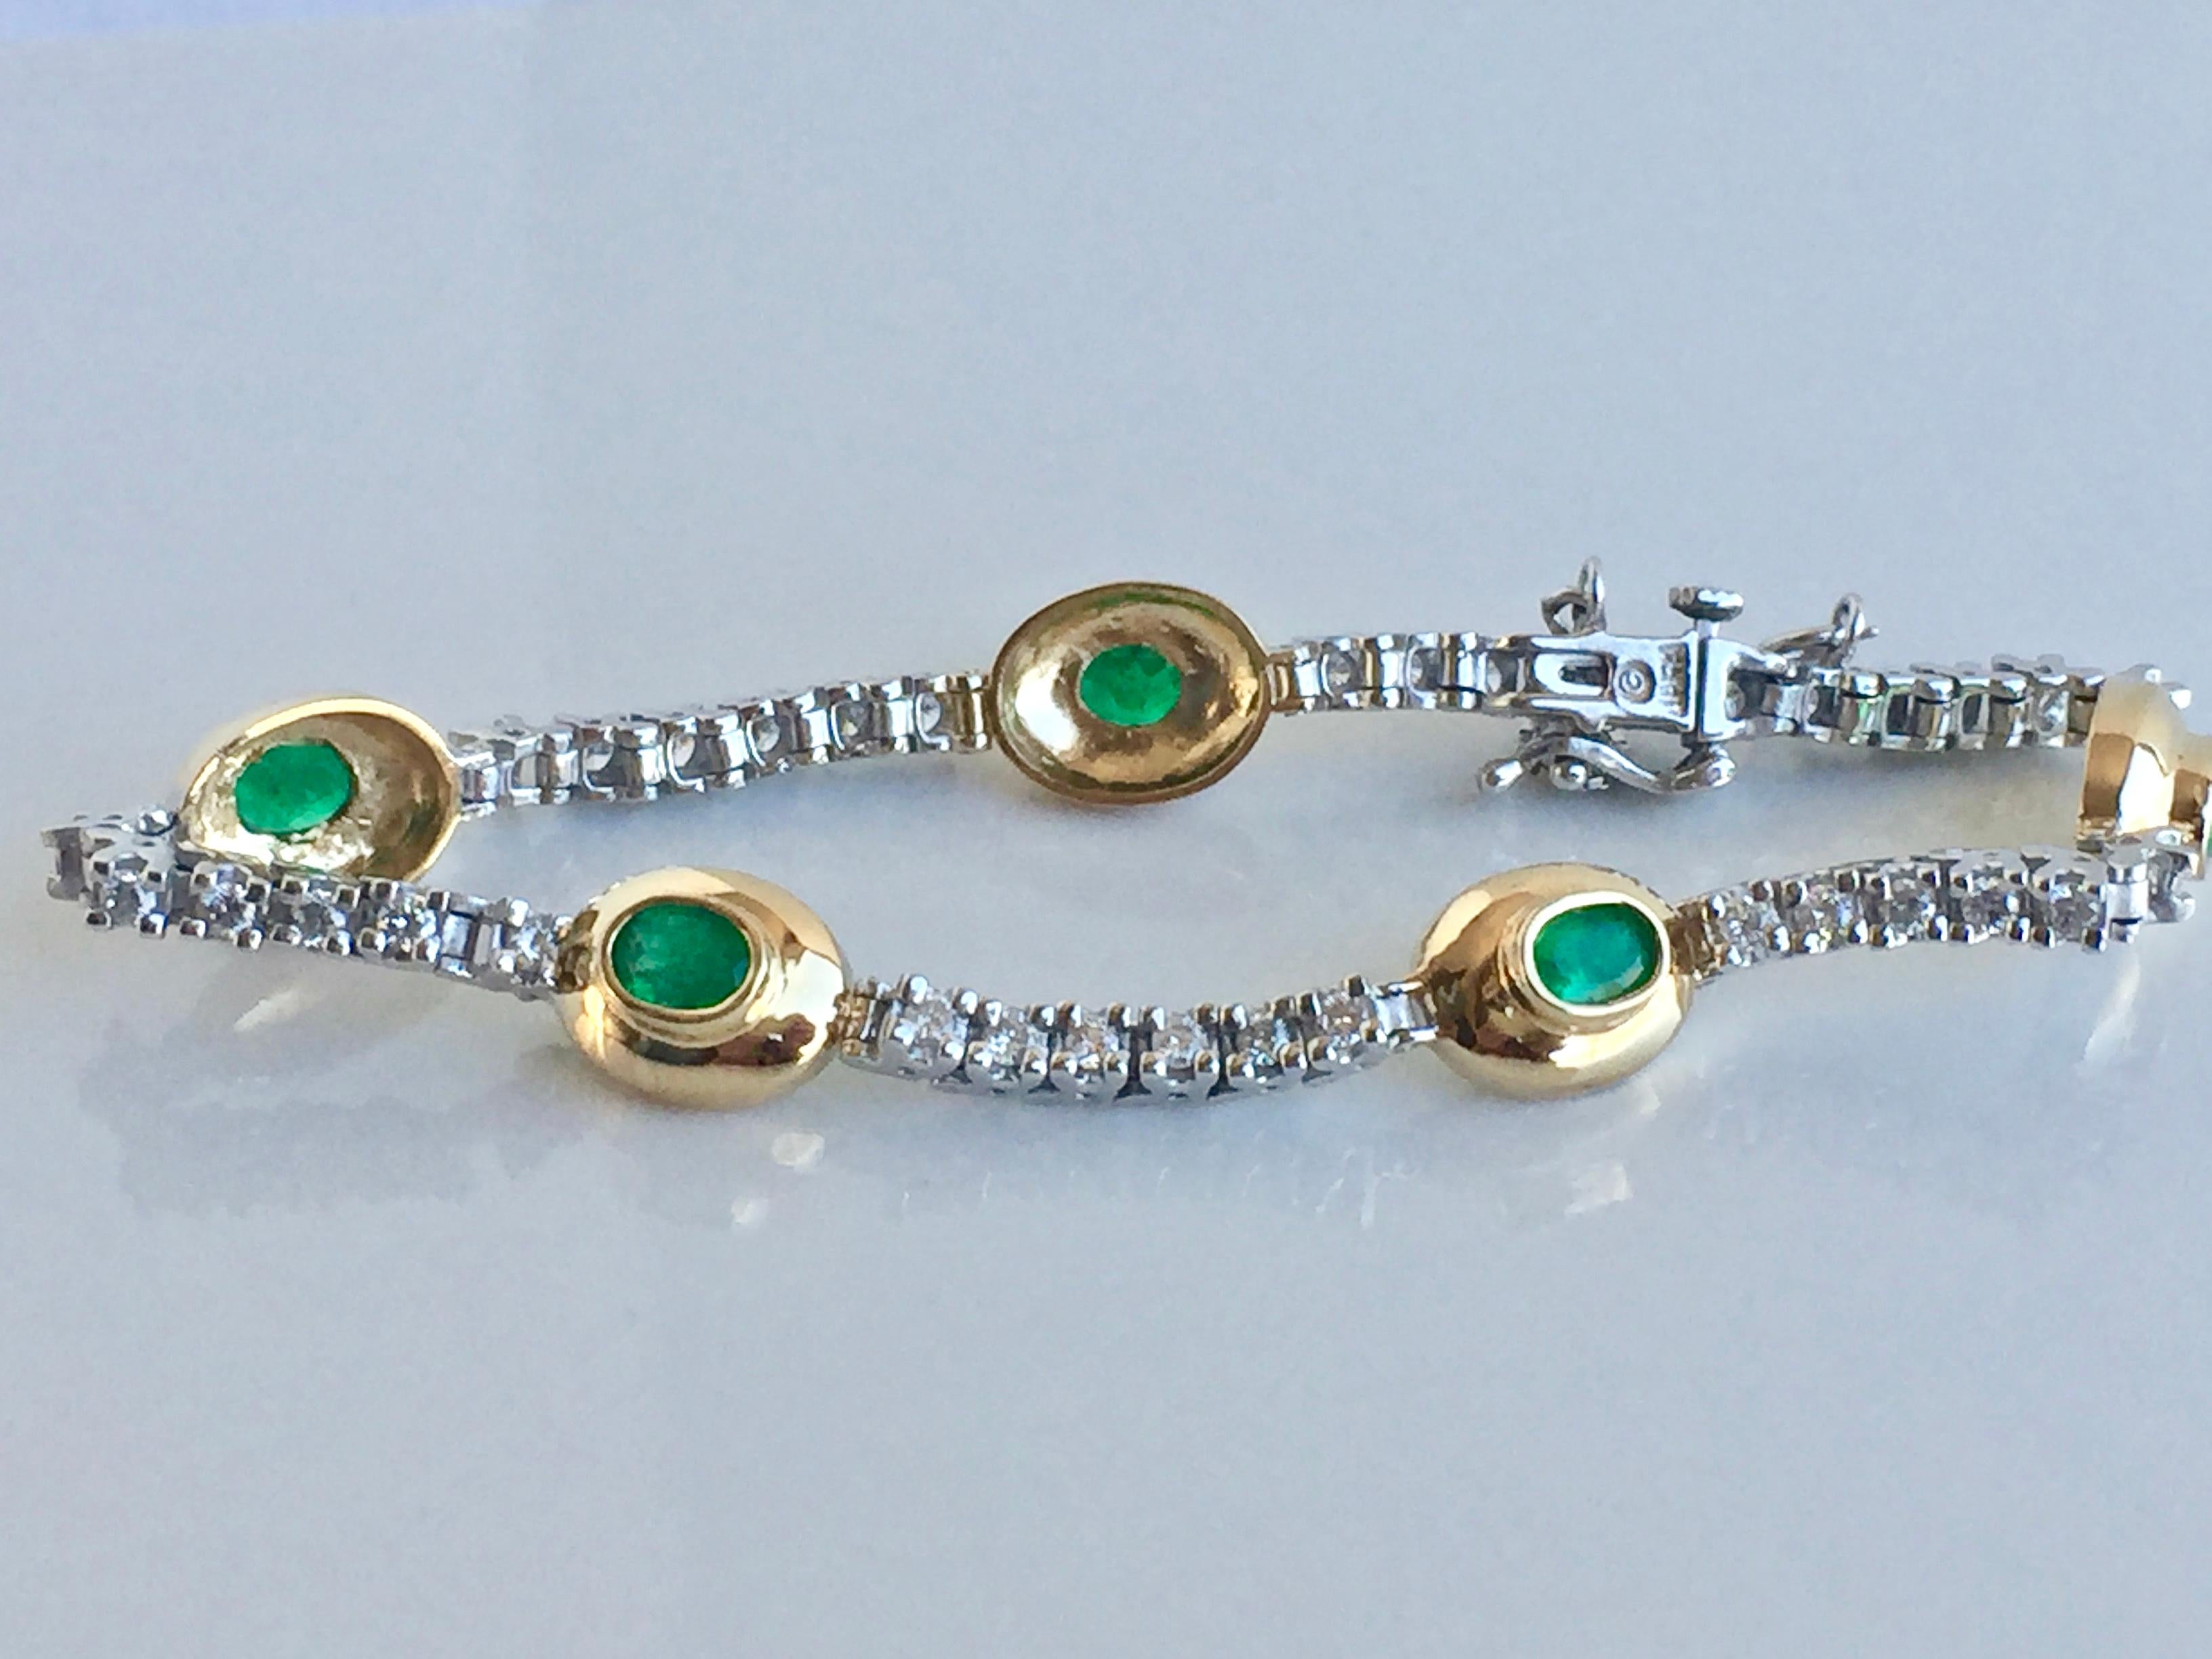 6.50 Estate Unique Diamond & Emerald Bracelet Gold
The Gorgeous two tone gold bracelet. Feature 5 Oval Genuine and natural Colombian NATURAL emeralds that have an Intense Medium Green Color- VS in clarity . The emeralds are bezel set in 18K yellow